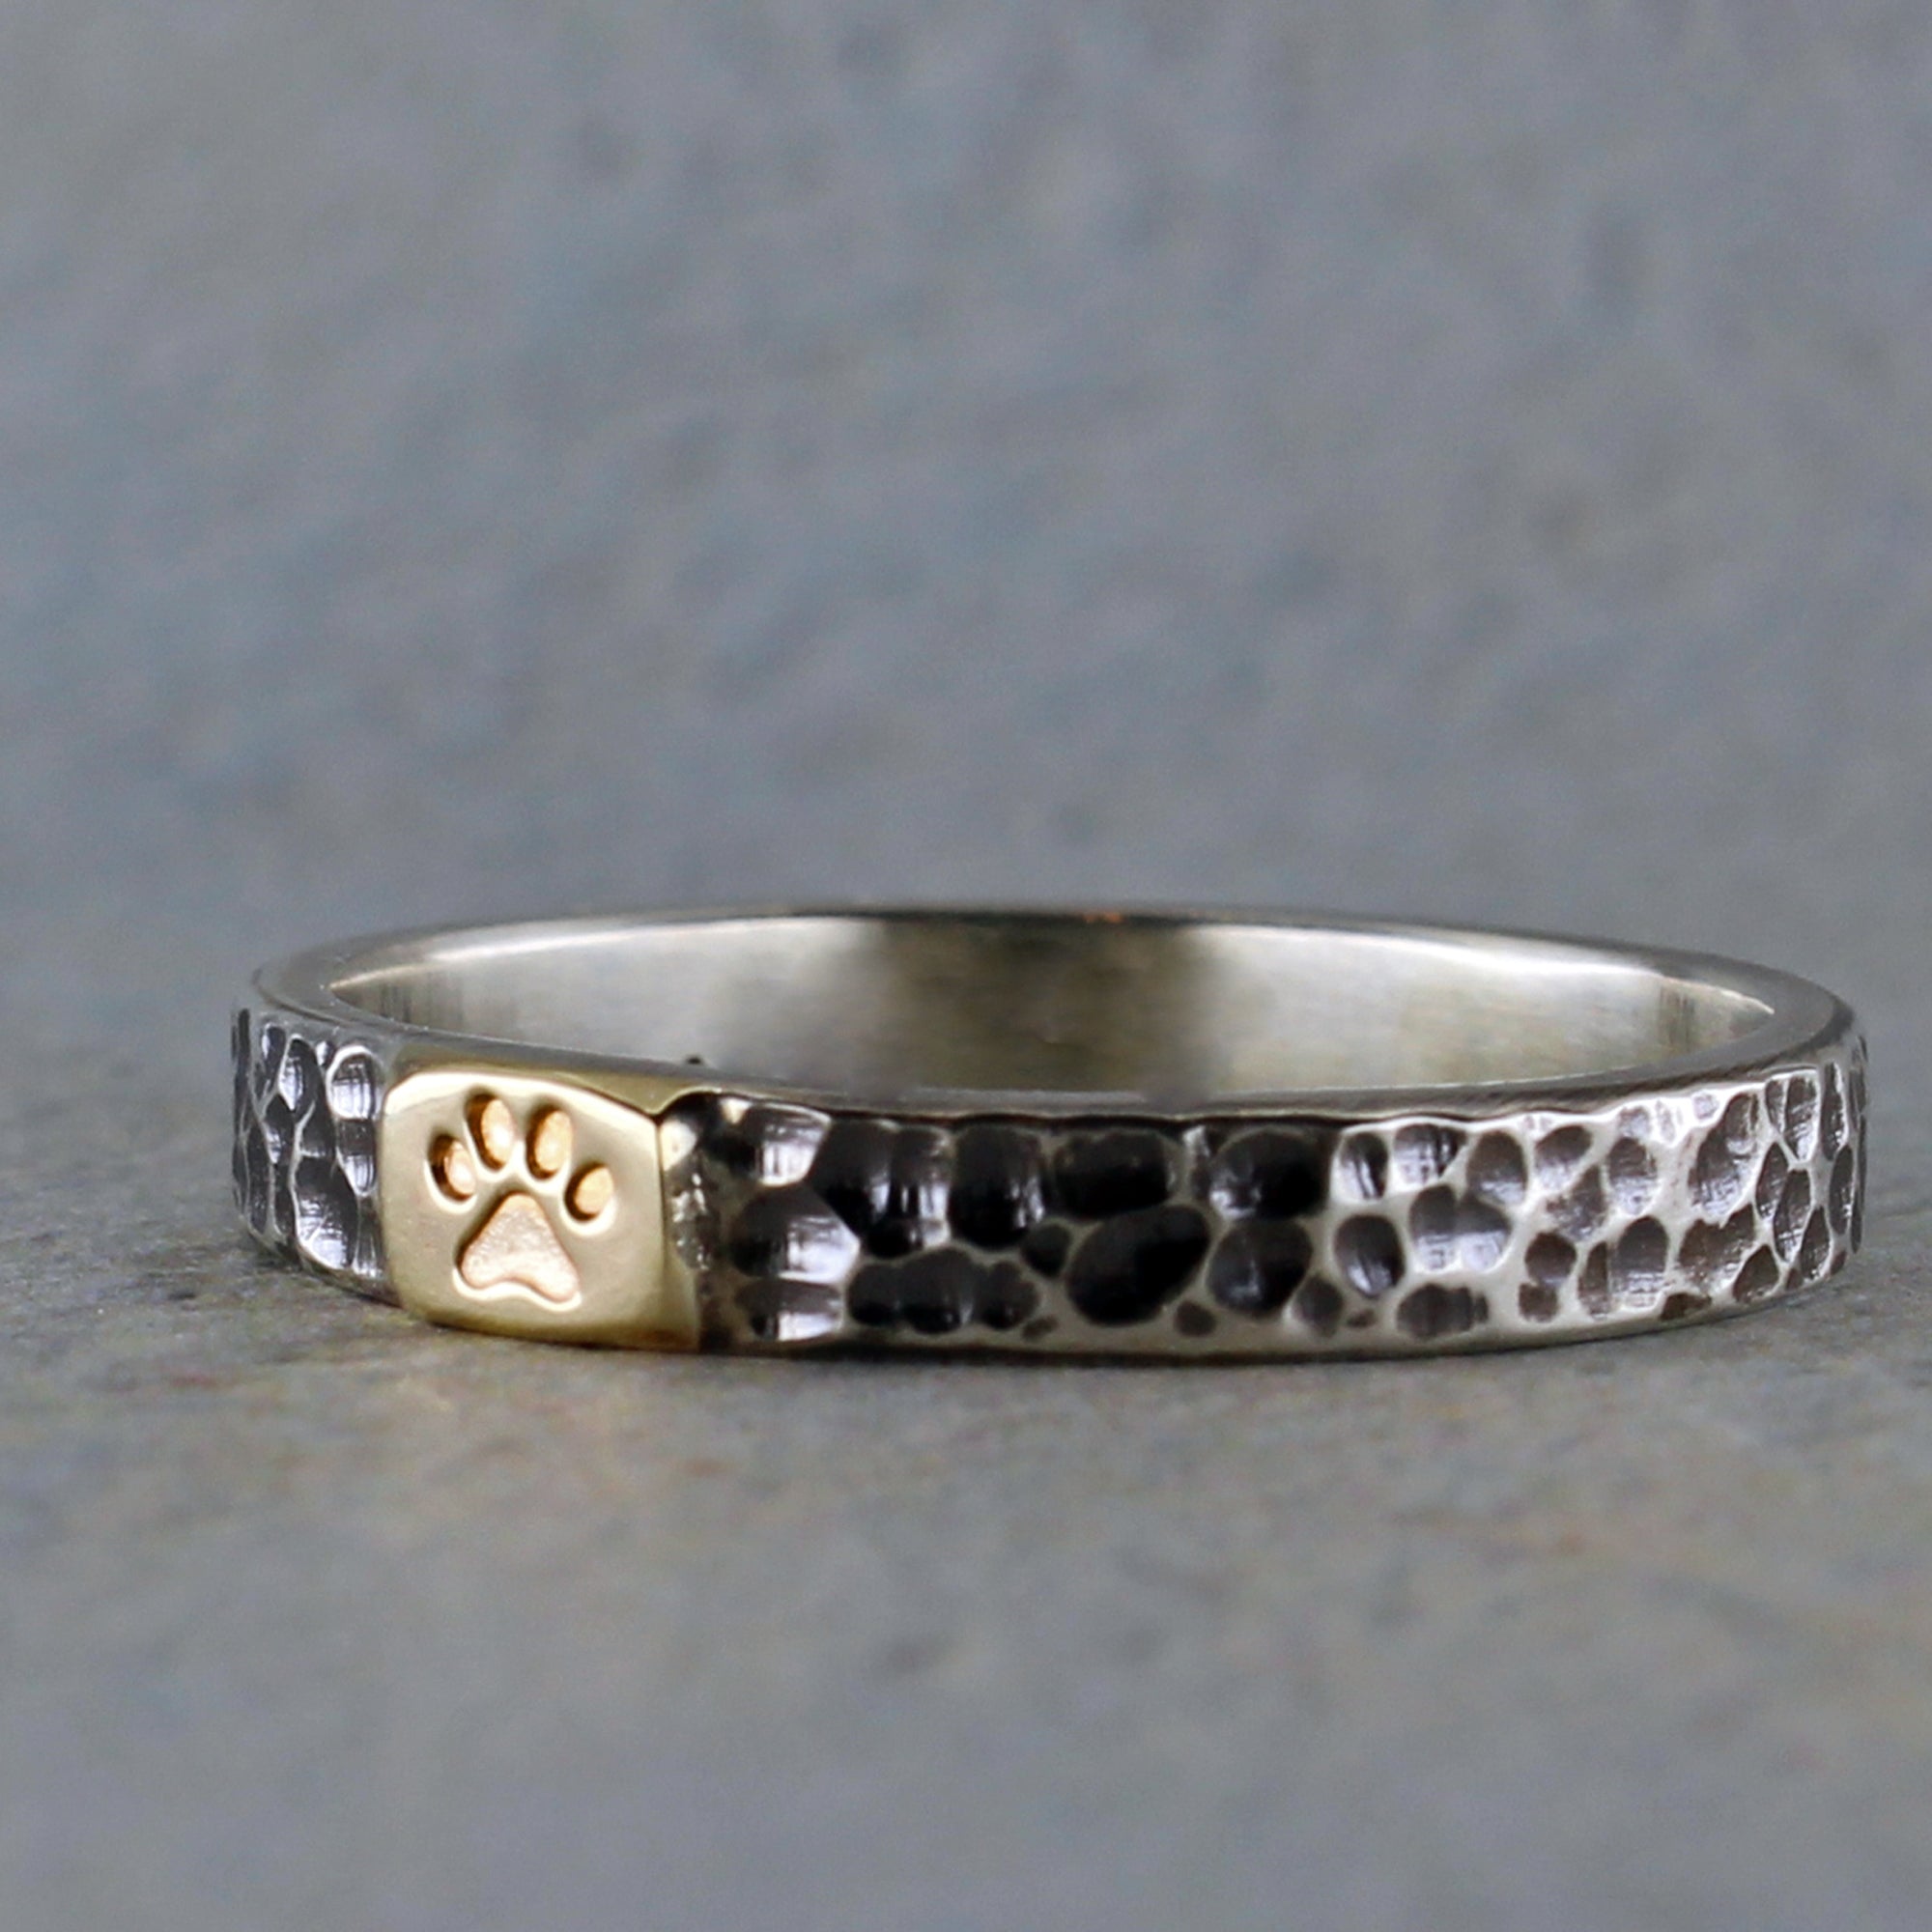 Unique Engagement Ring of a Dog's Paw Print! | Paw jewelry, Paw print ring,  Body jewelry shop